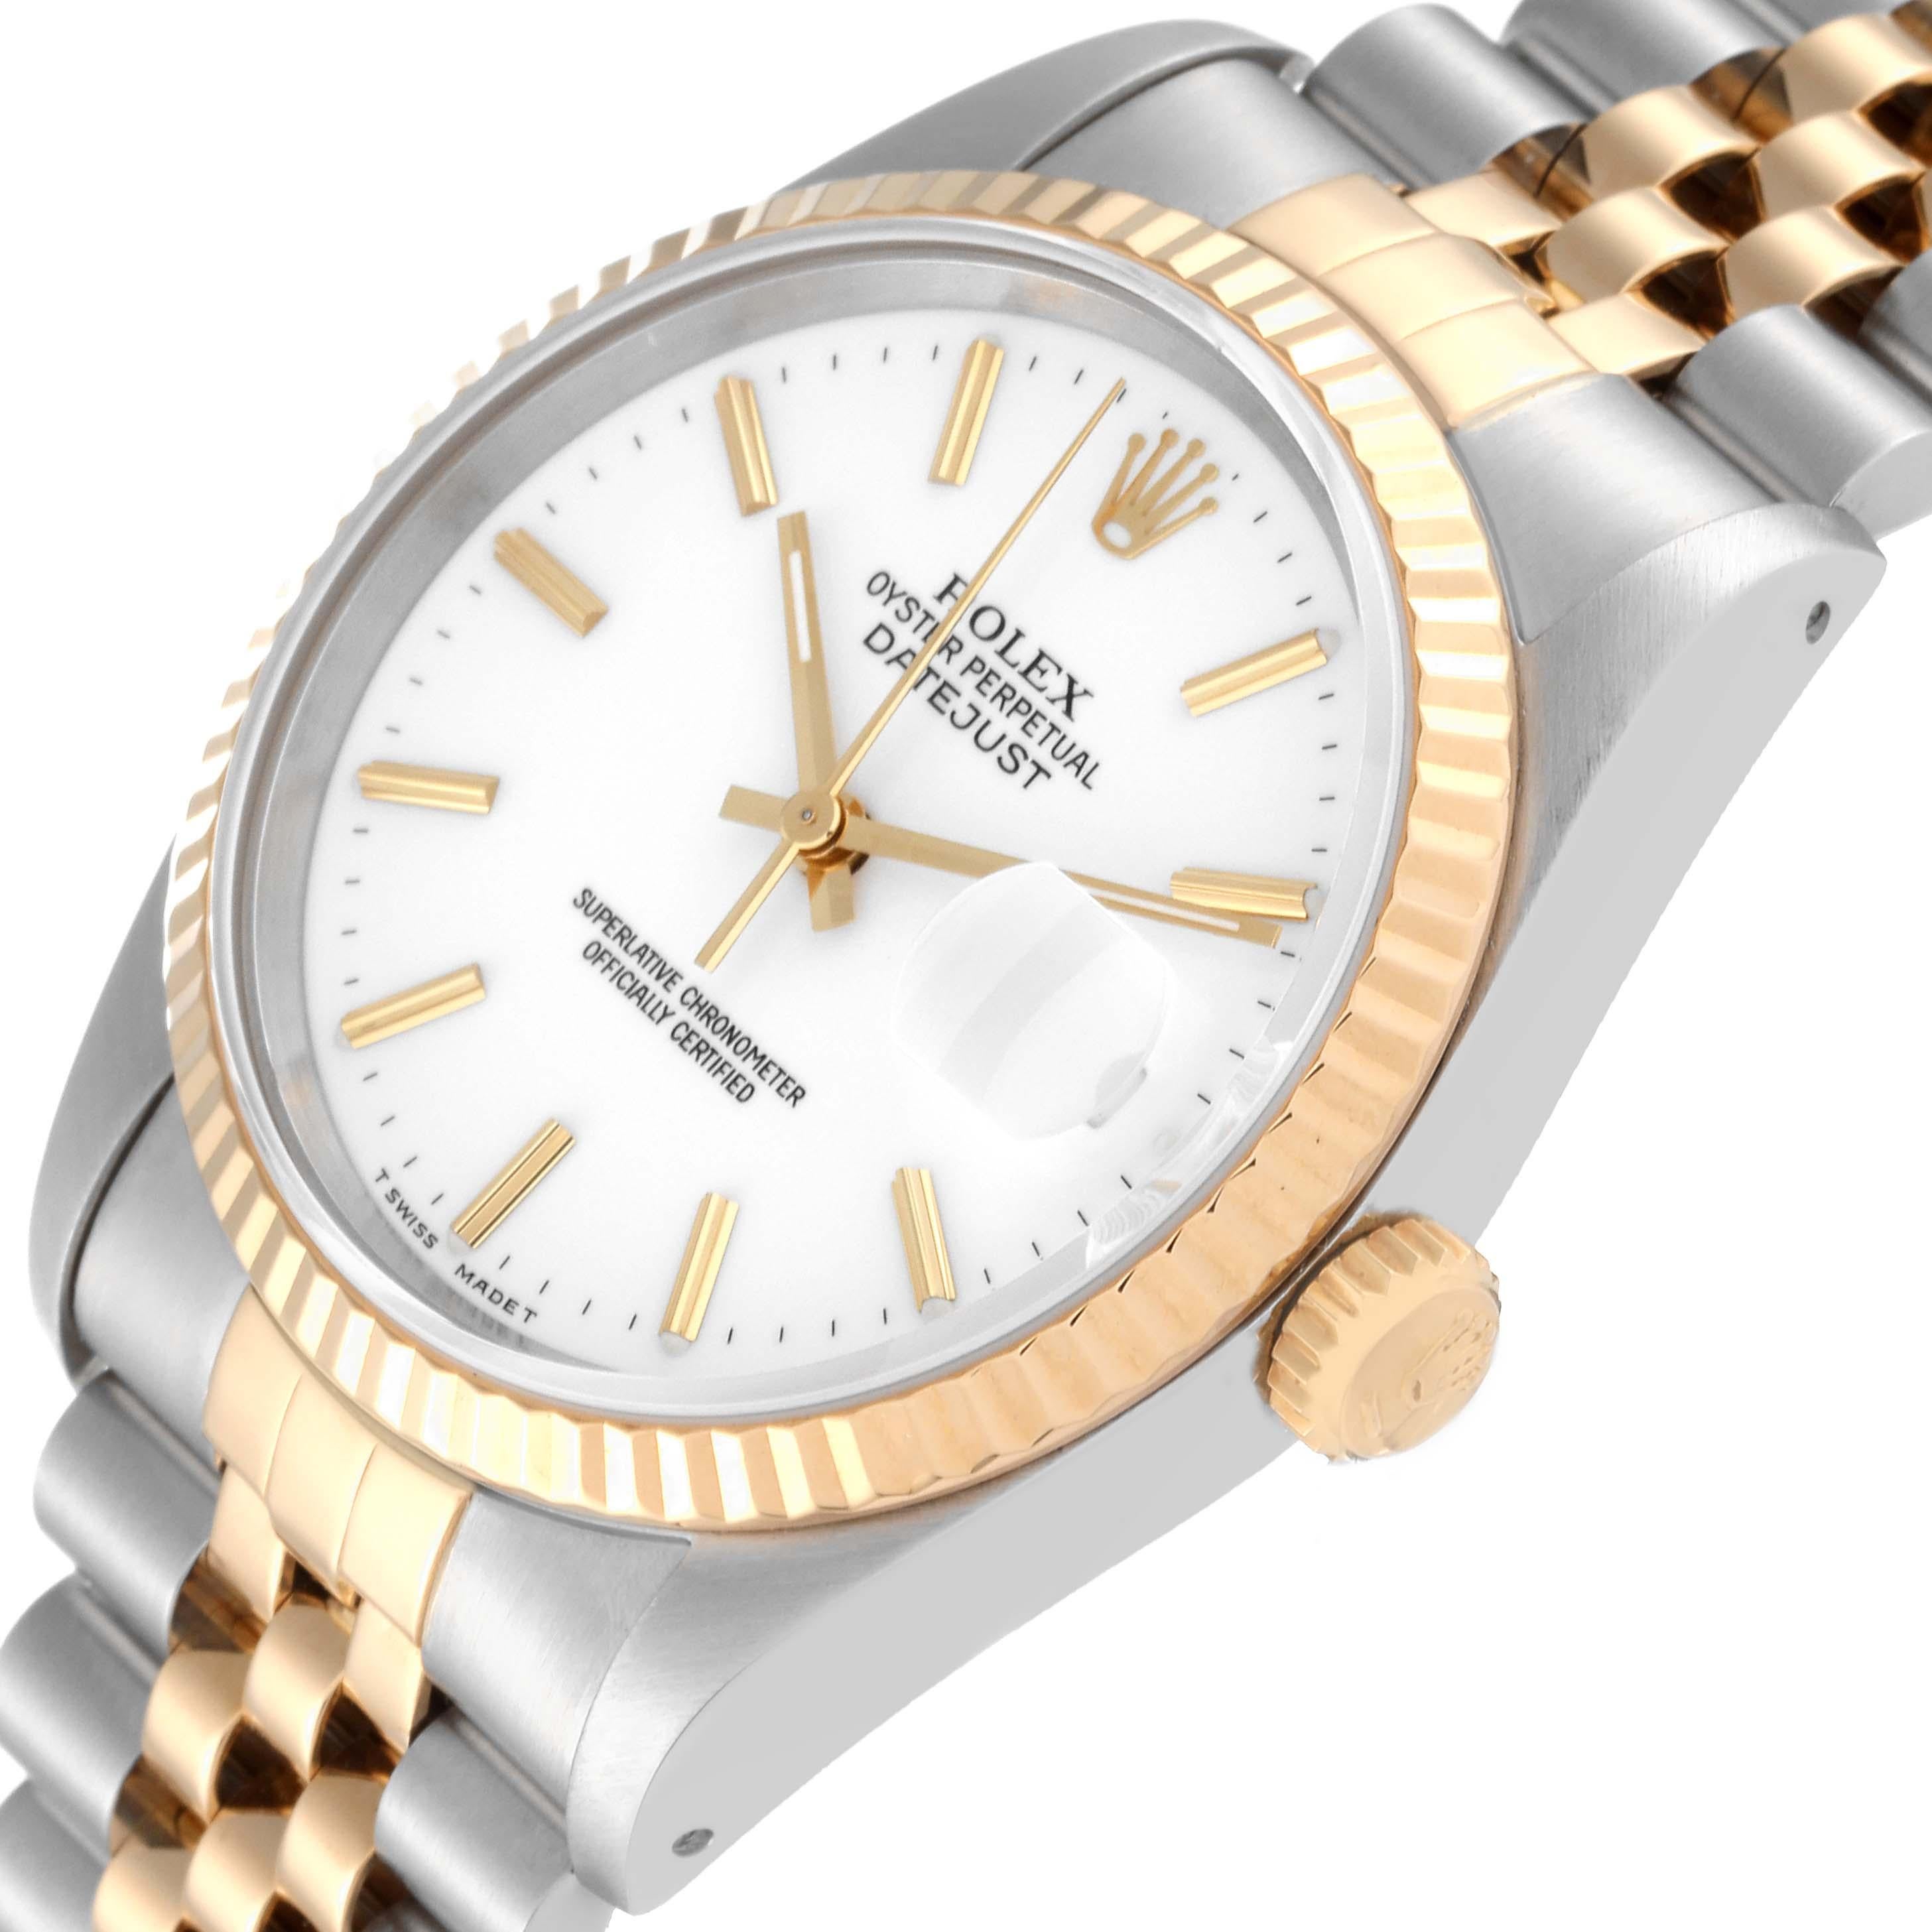 Rolex Datejust Steel Yellow Gold White Dial Mens Watch 16233 1